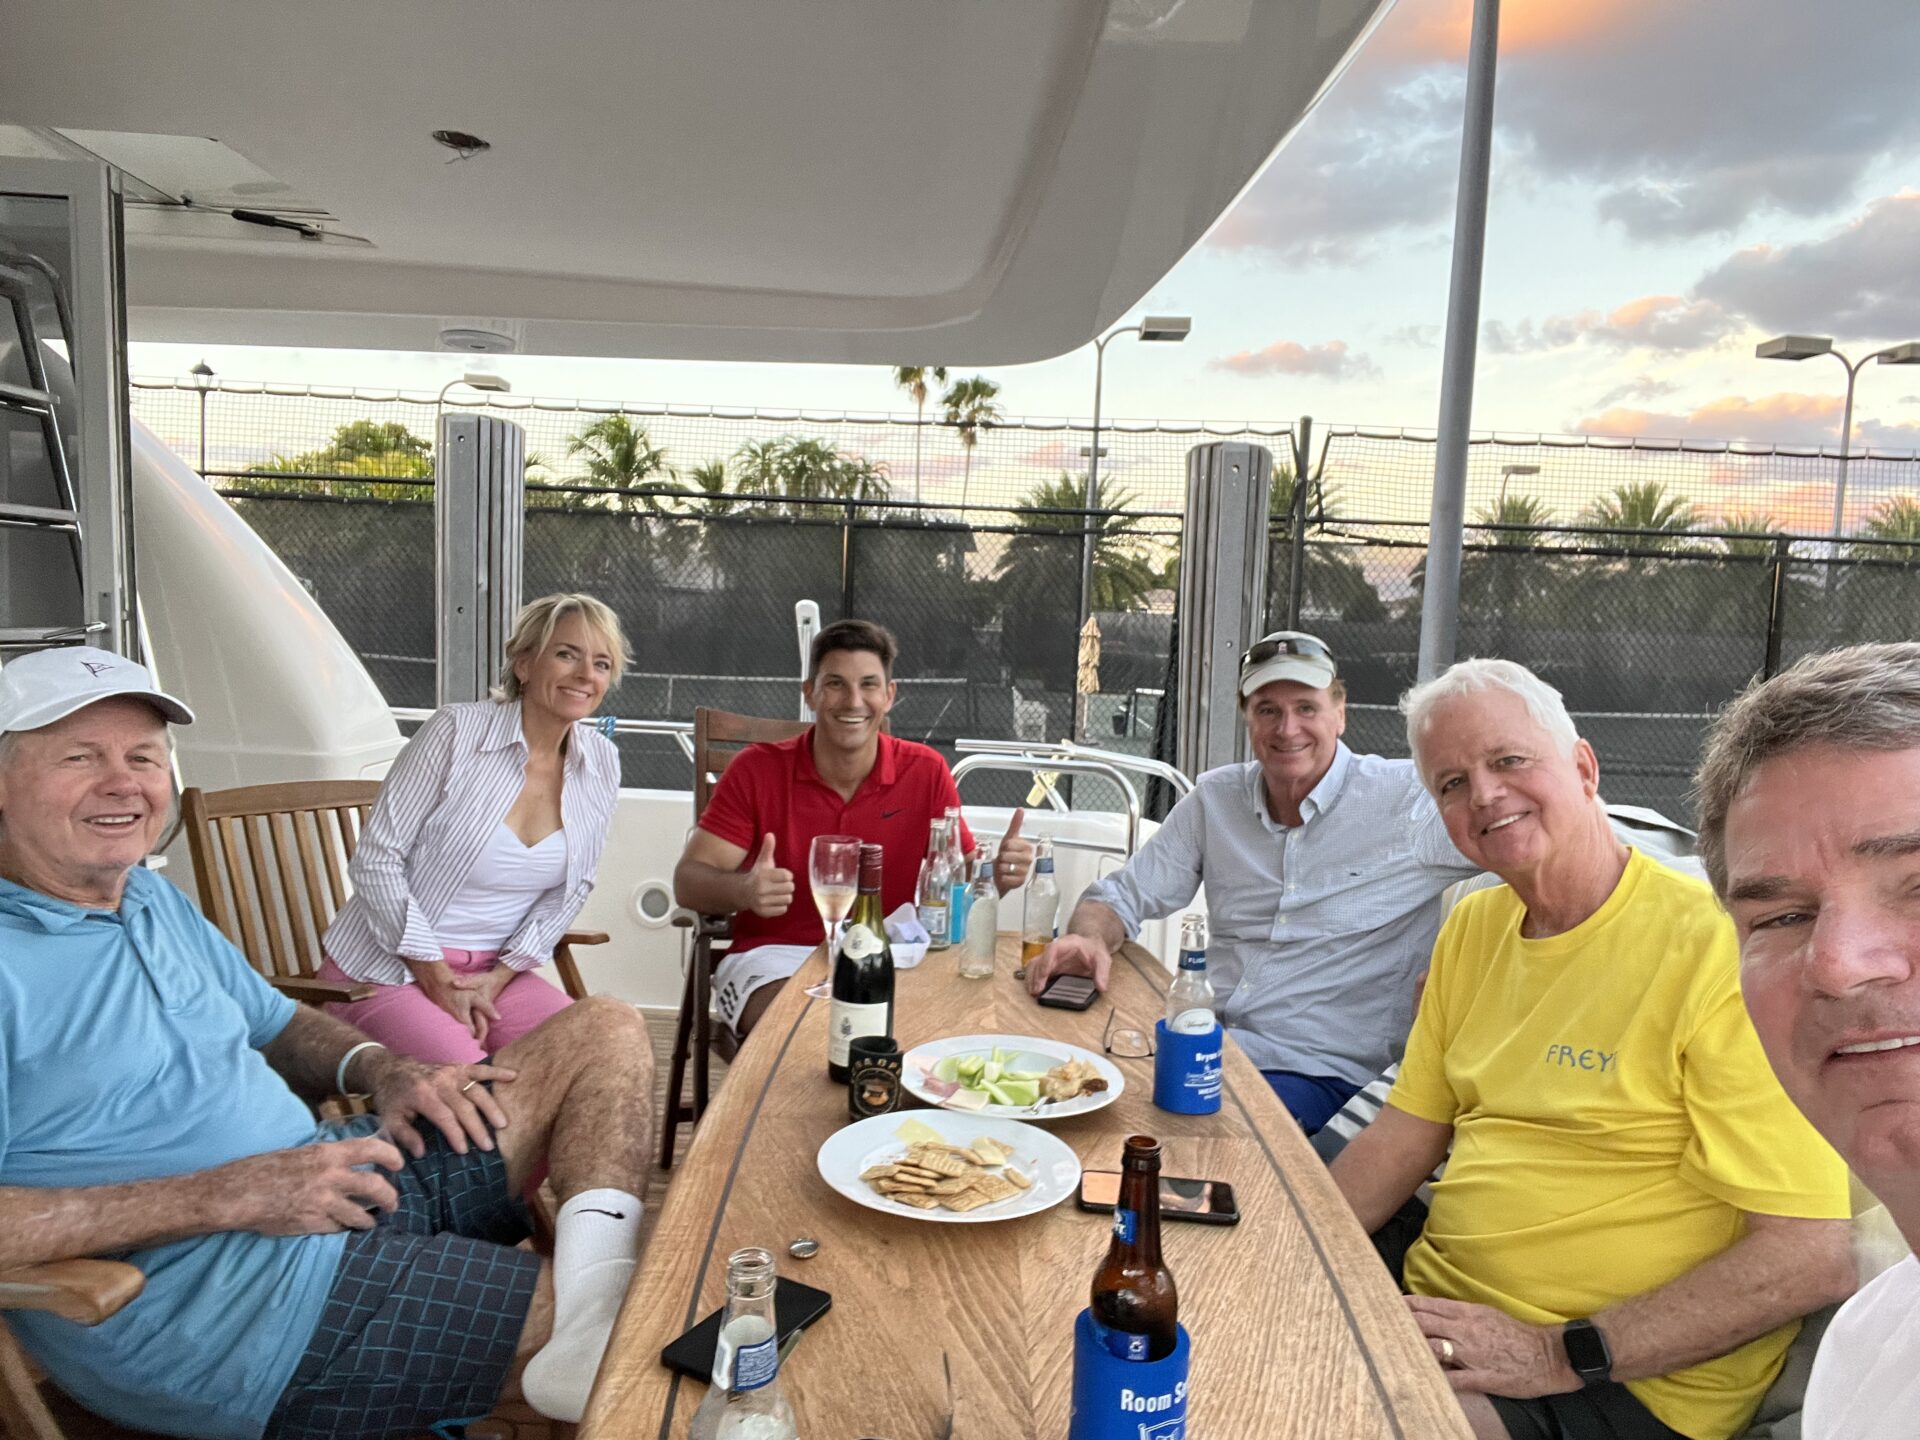 afternoon hangout of tennis players